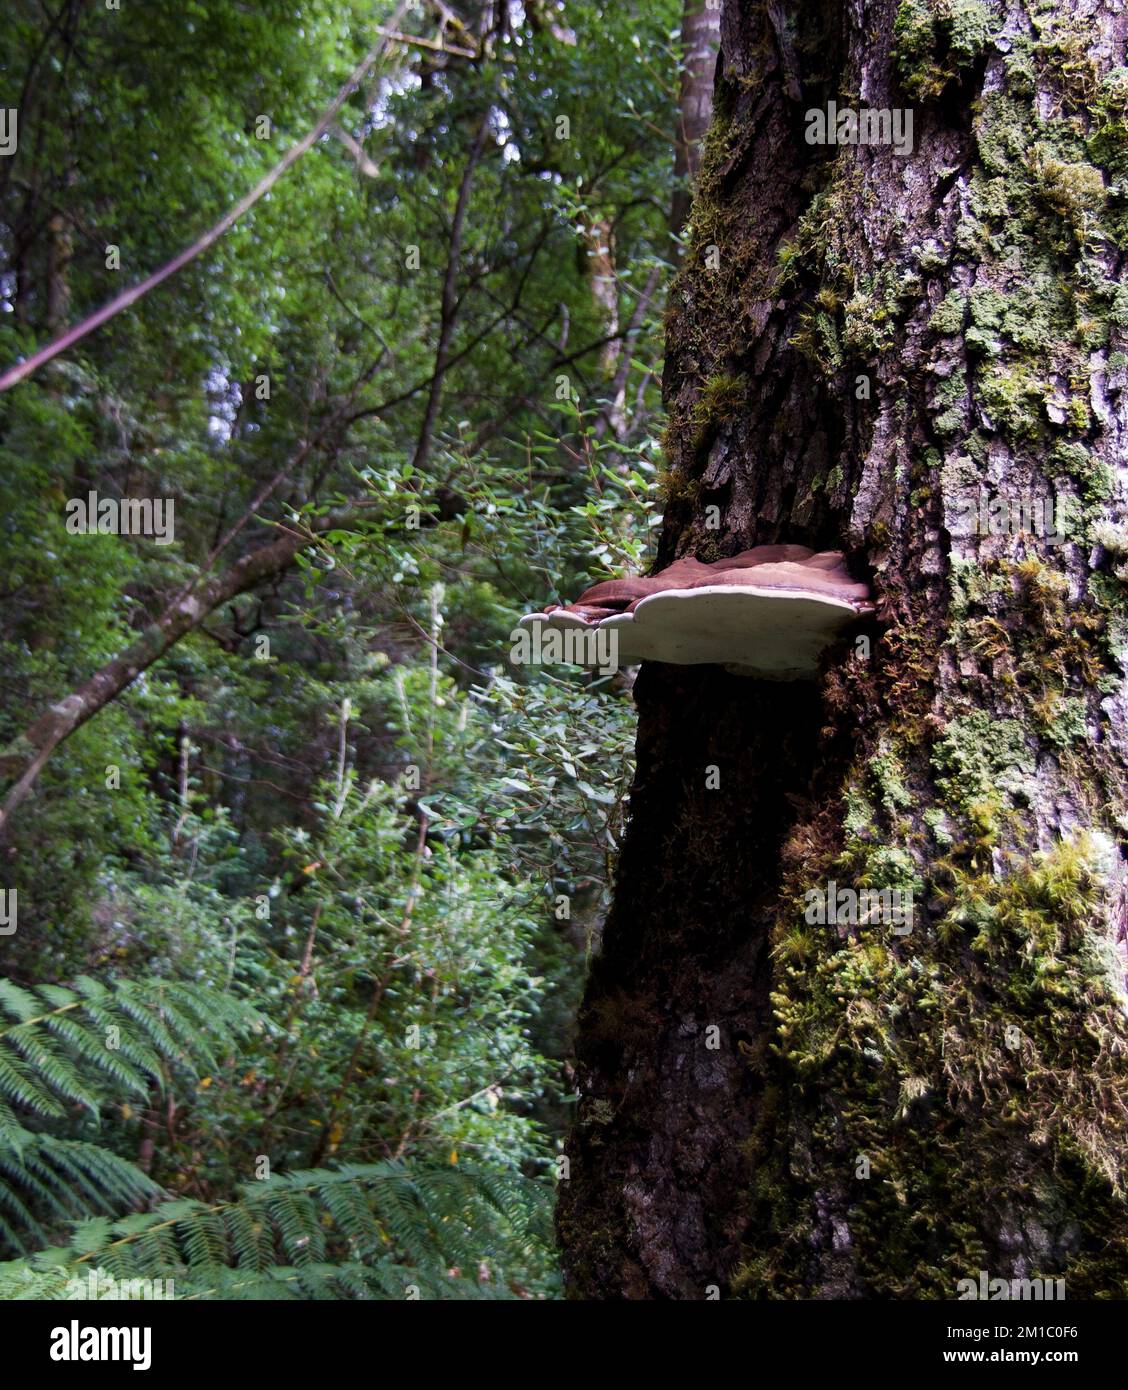 Number of tree fungus found in the forest around cradle mountain in Tasmania Stock Photo